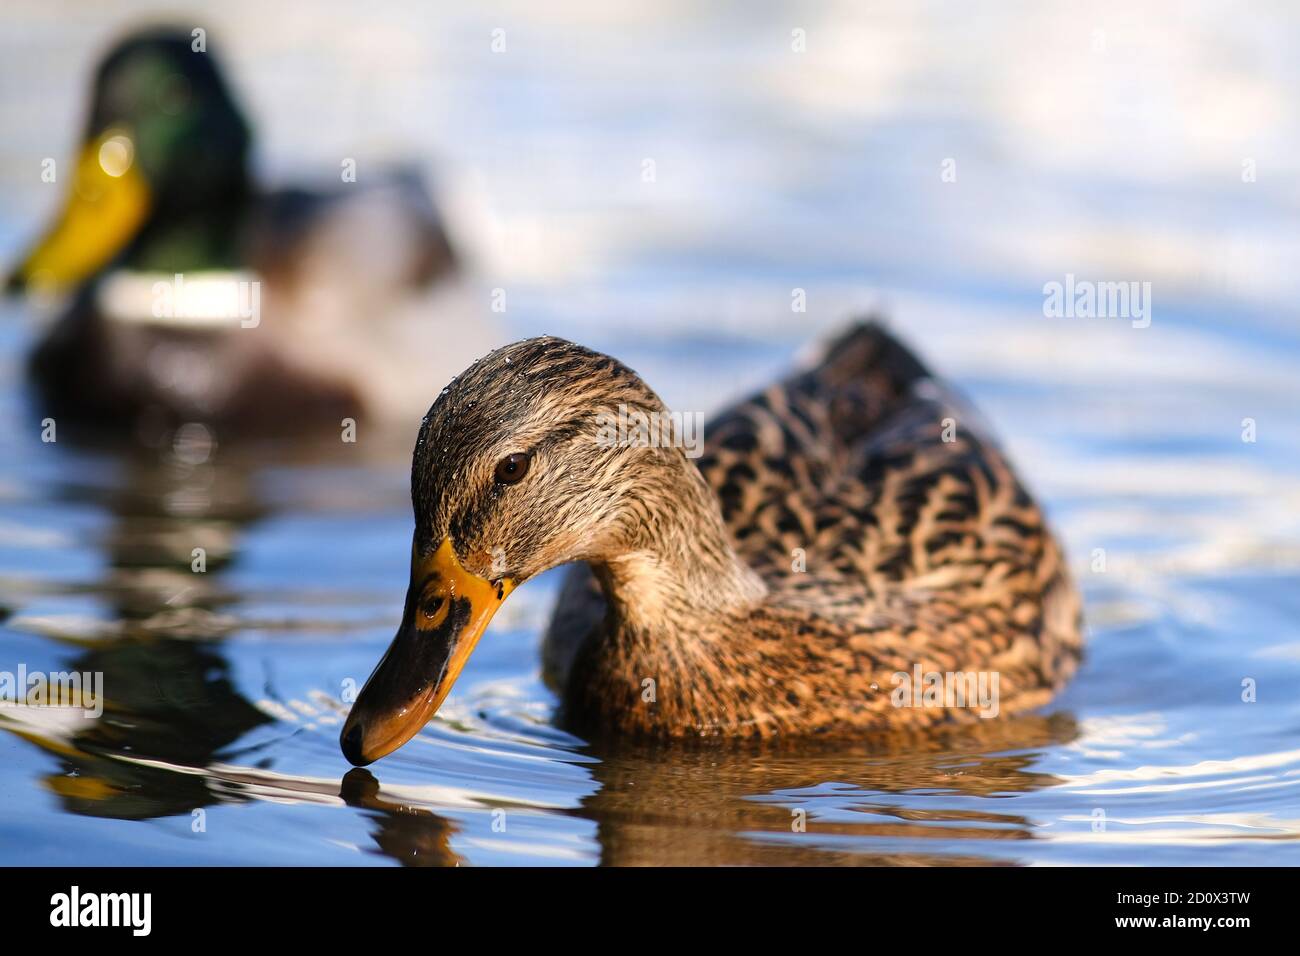 An amazing Mallard duck swims in a lake or river with blue water under a Sunny landscape. Birds and animals in the concept of wild nature Stock Photo